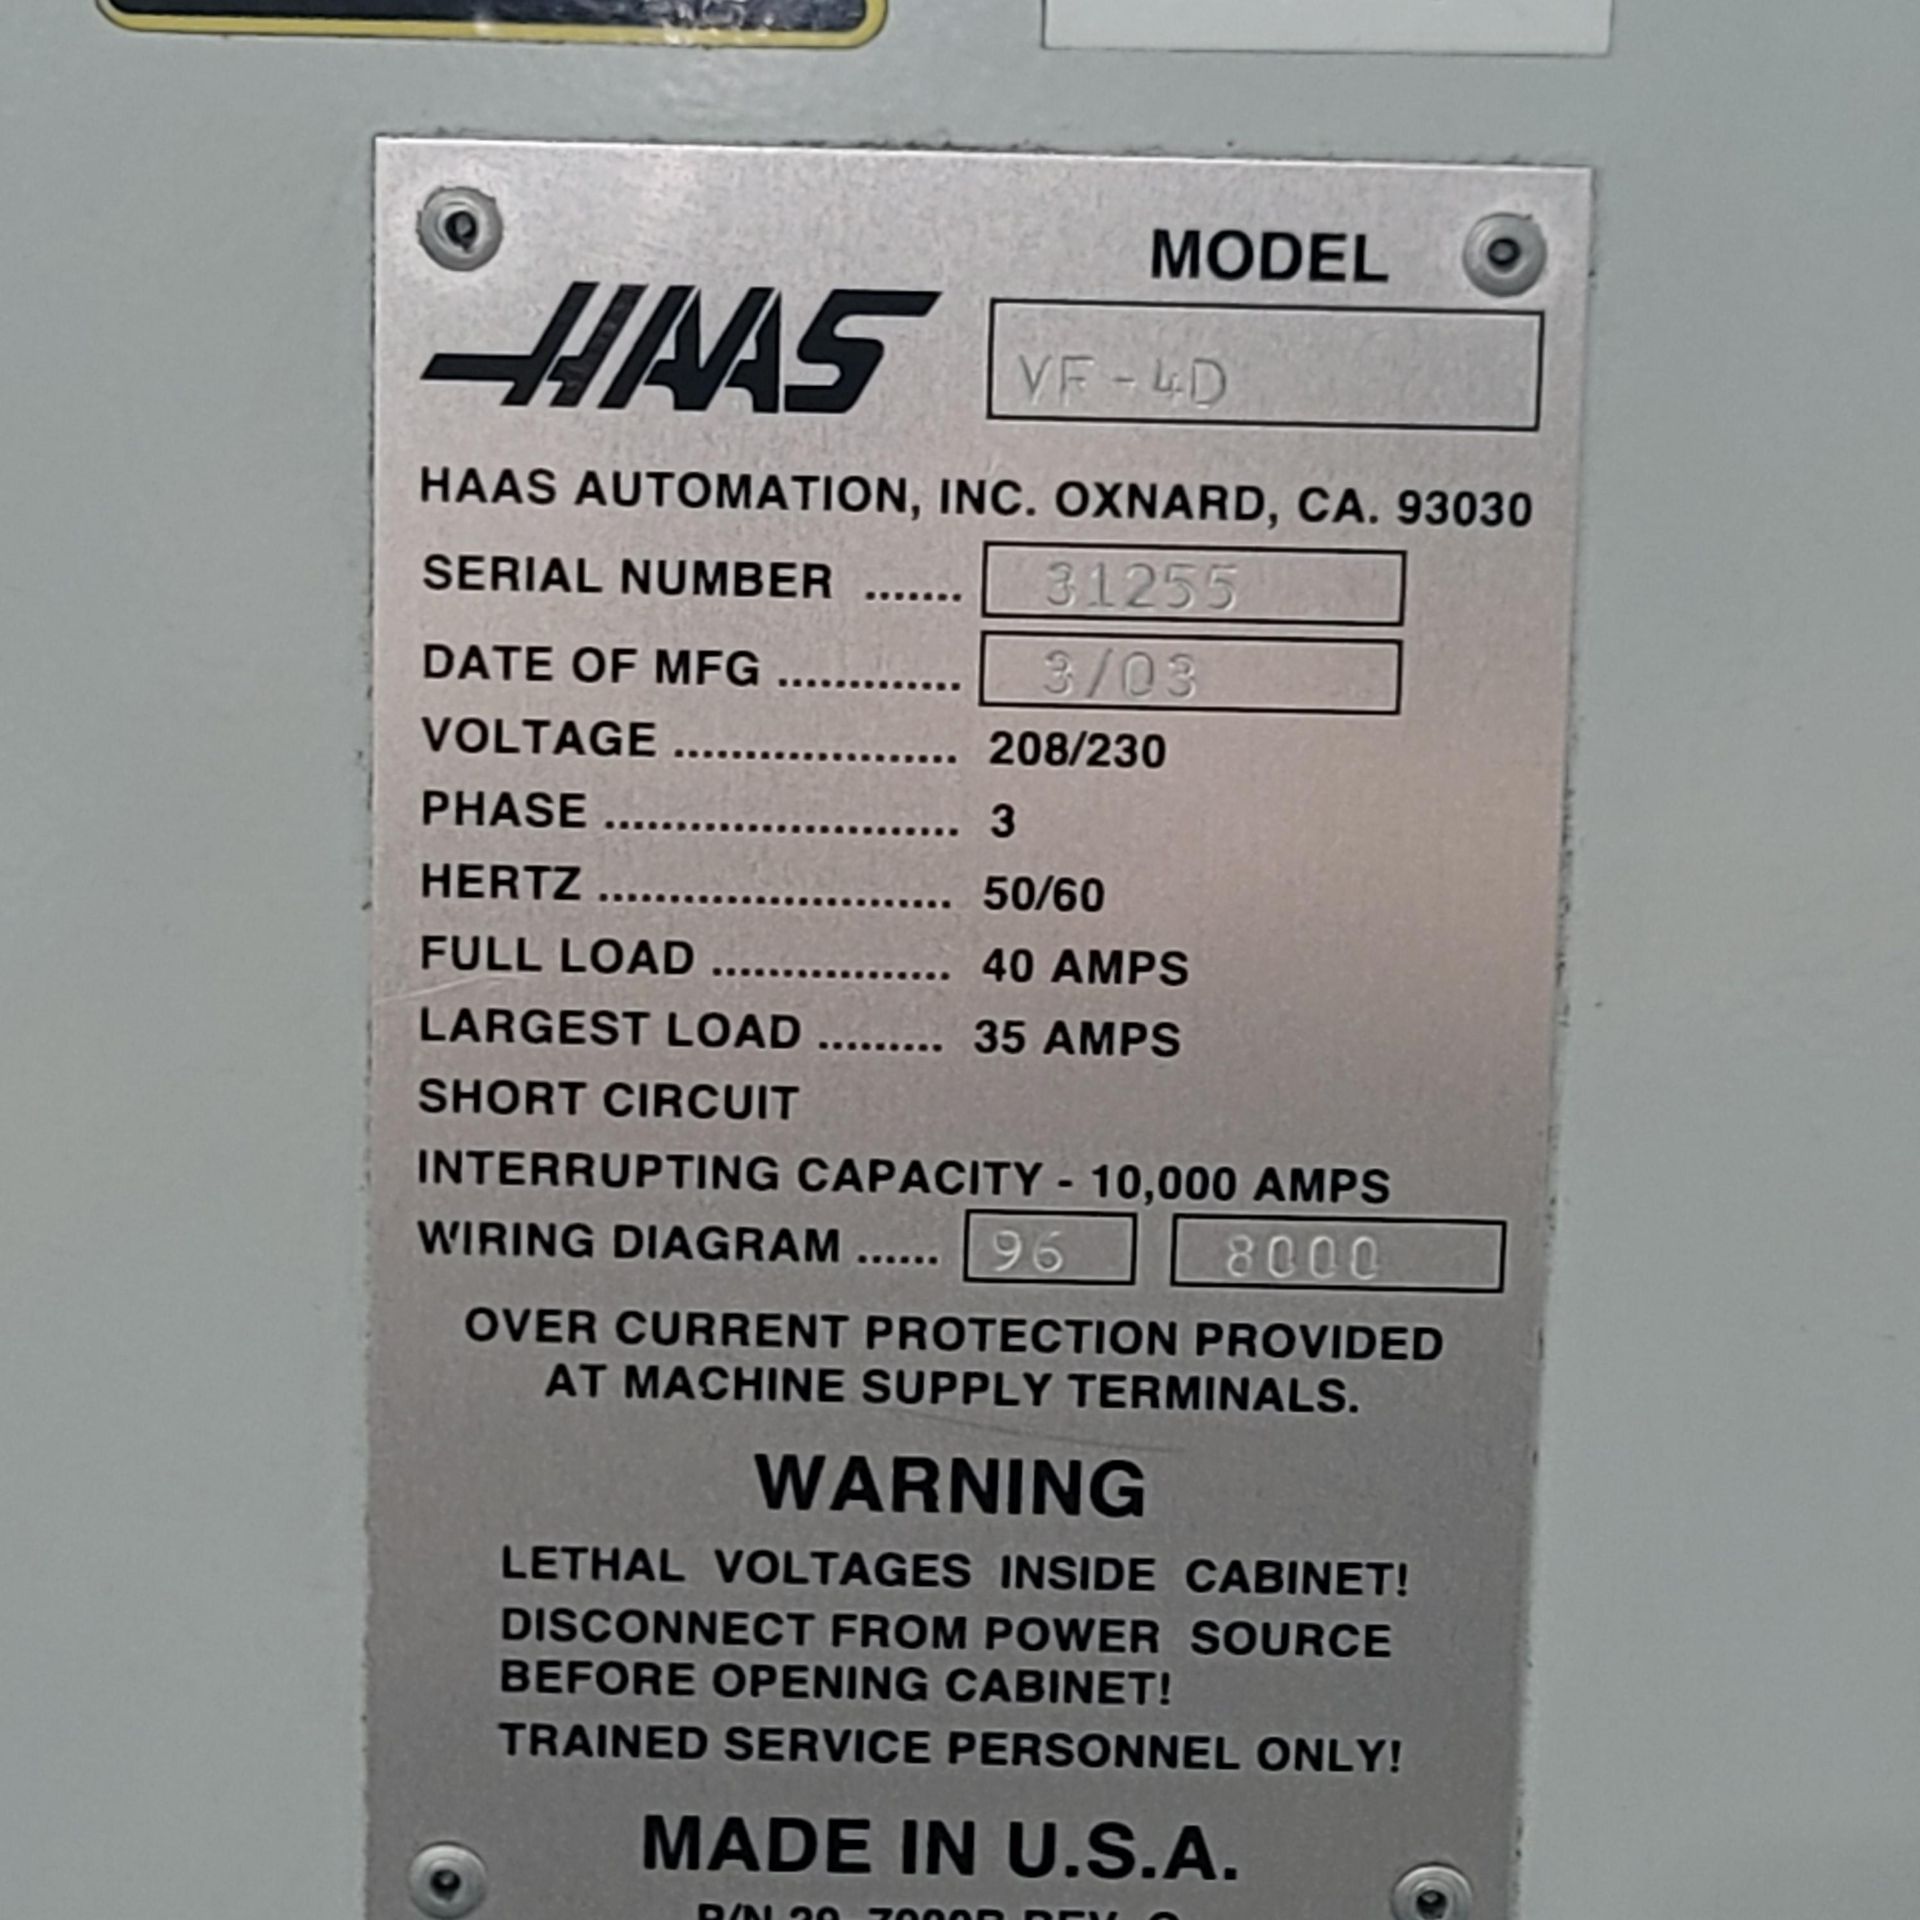 2003 HAAS VF-4D VERTICAL MACHINING CENTER, XYZ TRAVELS: 50" X 20" X 25", TABLE SIZE: 52" X 18", - Image 10 of 10